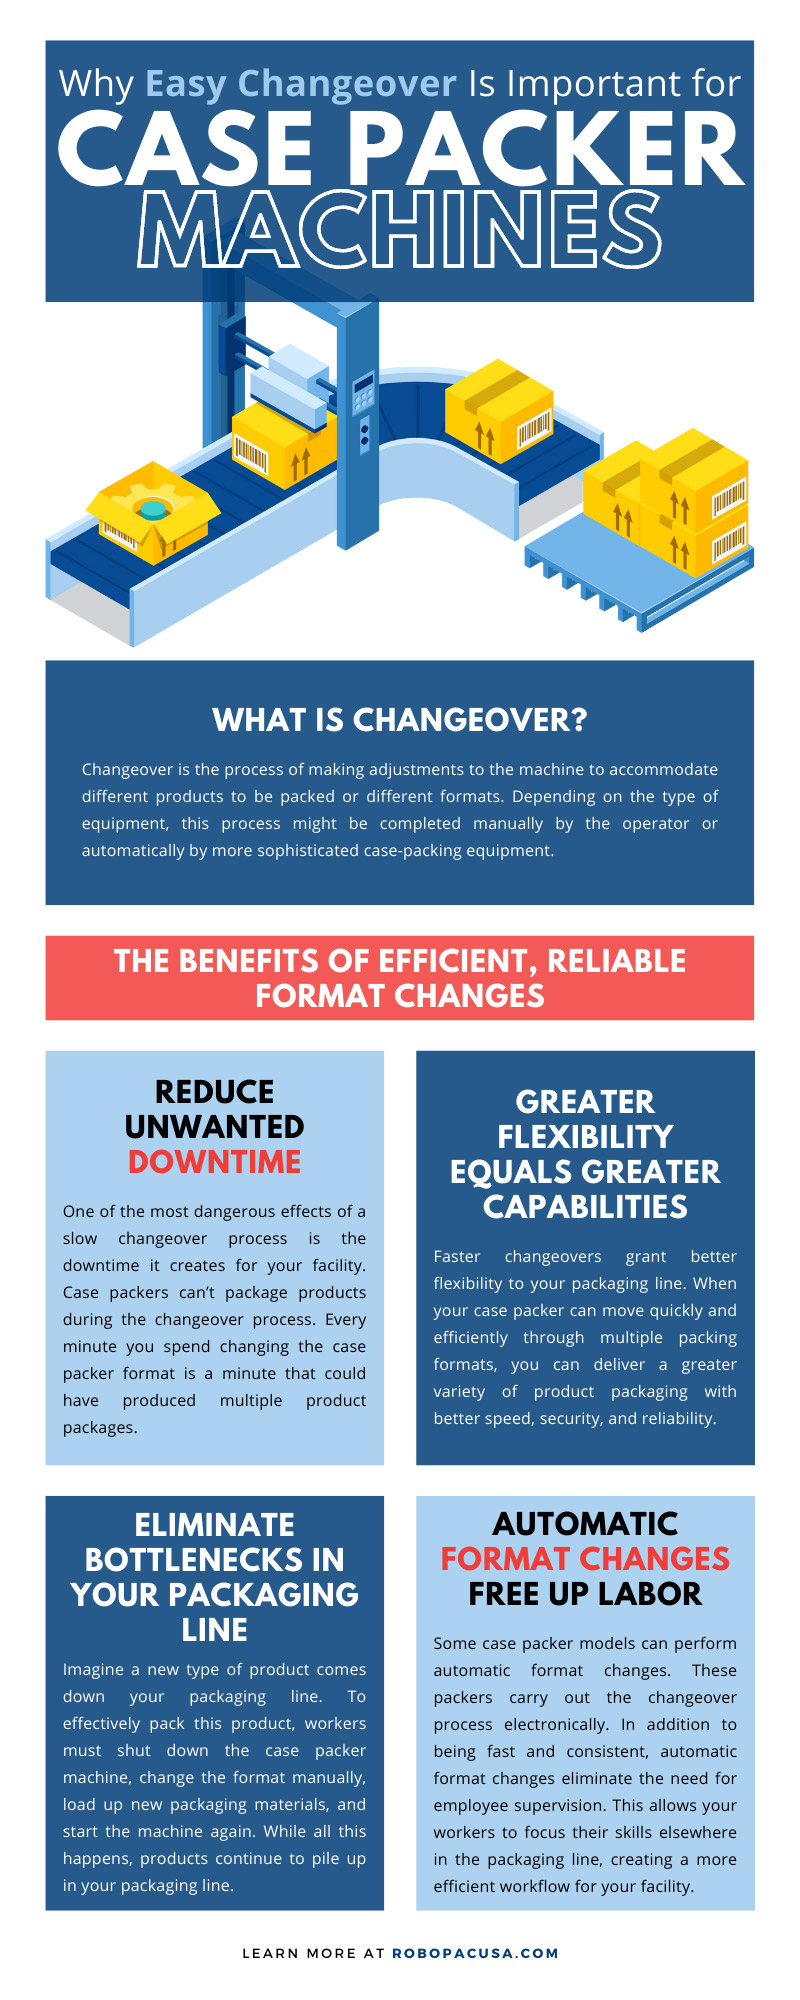 Why Easy Changeover Is Important for Case Packer Machines